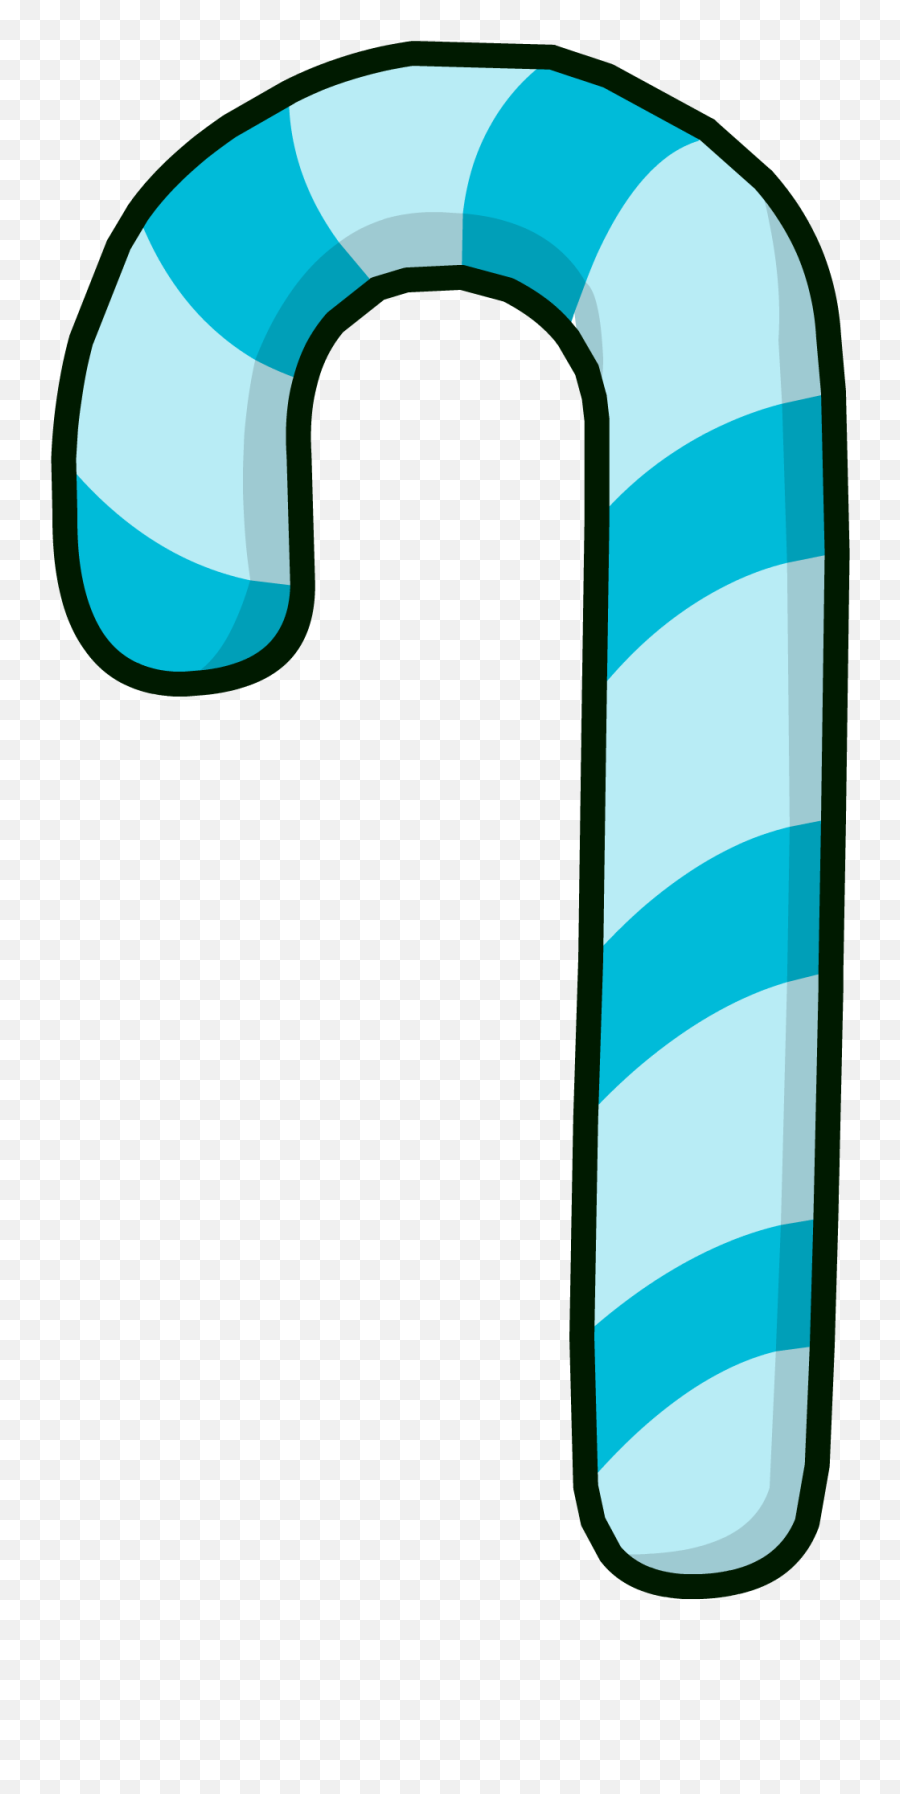 Ice Candy Cane Club Penguin Rewritten Wiki Fandom - Blue Candy Cane Png,Candy Cane Transparent